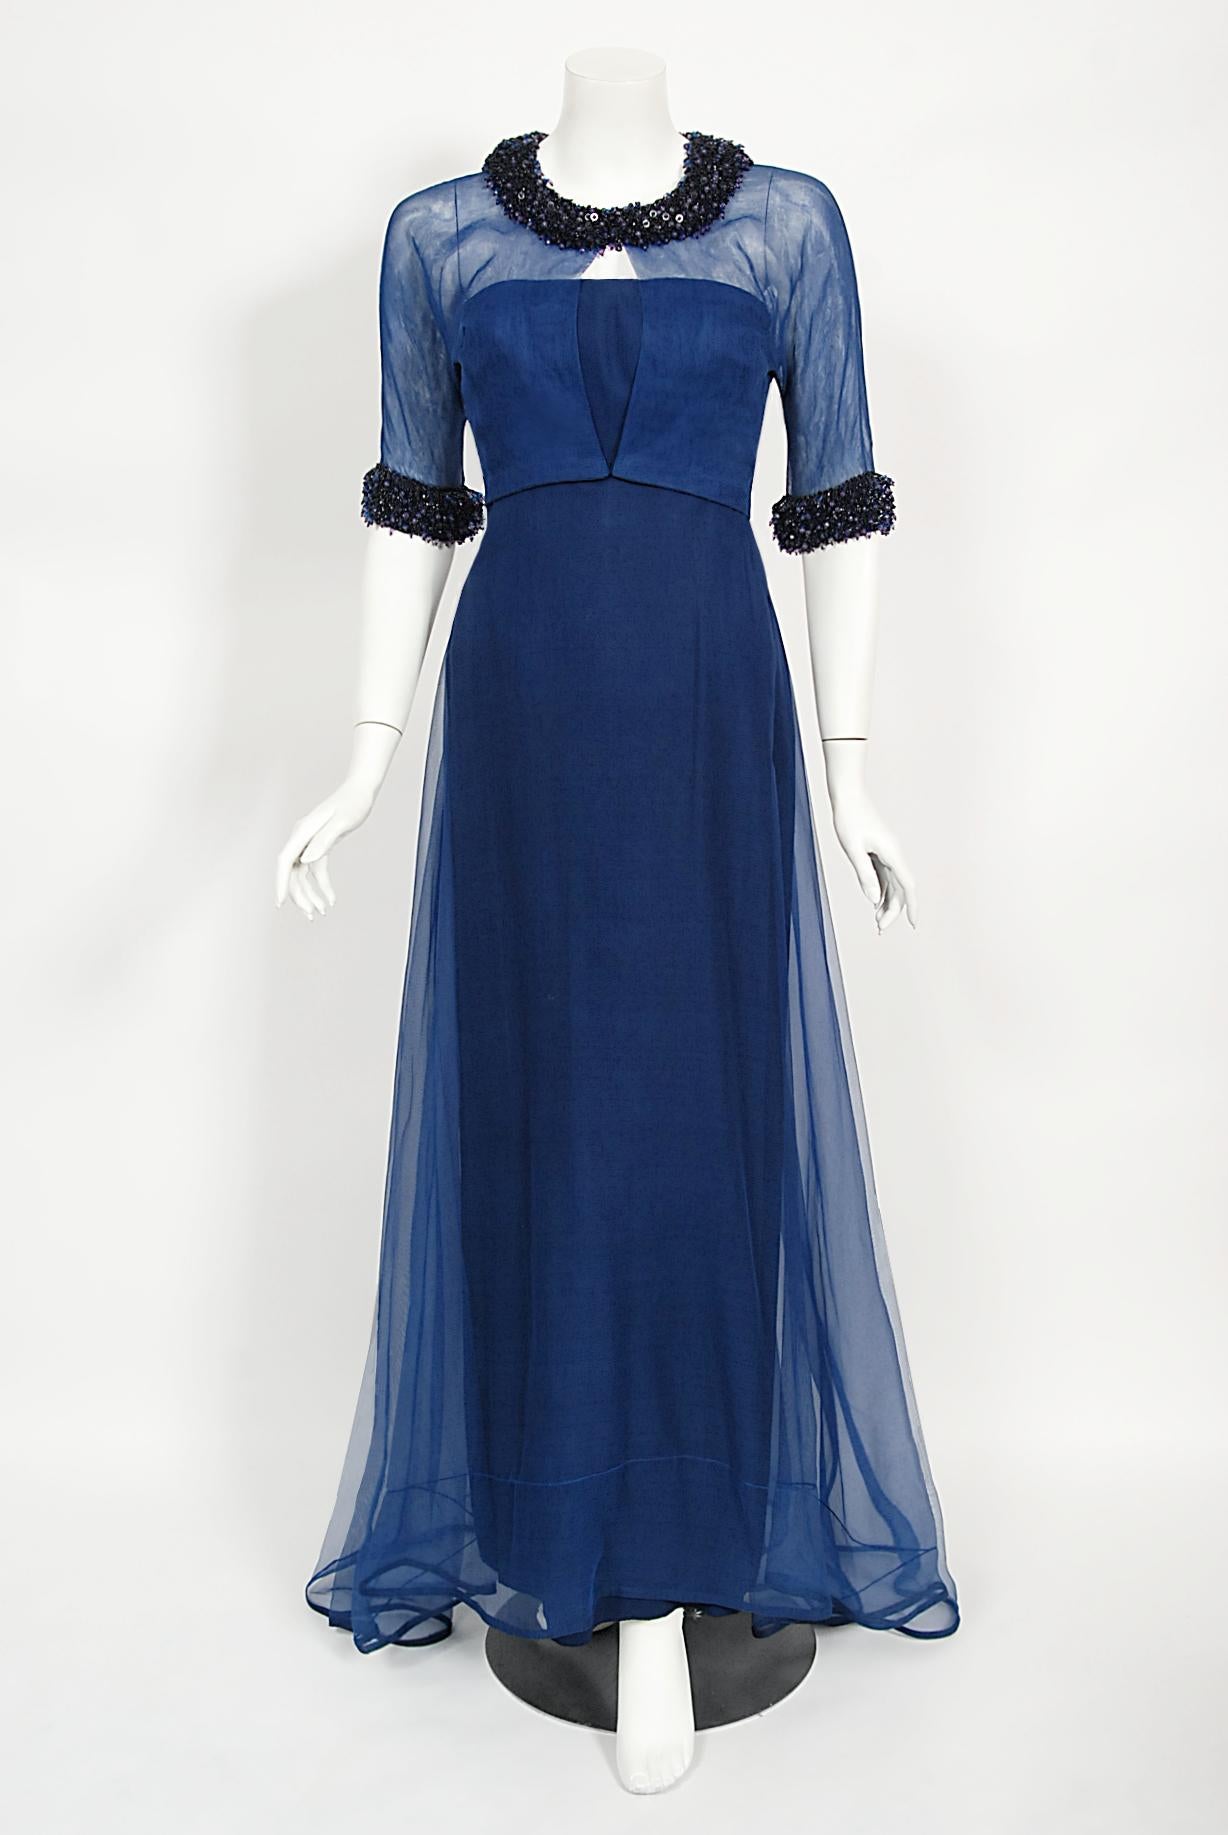 An unforgettable and incredibly rare Madame Grès haute couture vibrant cobalt-blue sheer silk three piece gown ensemble dating back to the mid 1960's. This dramatic look was custom commissioned by Contessa Marina Cicogna, a famous Italian film